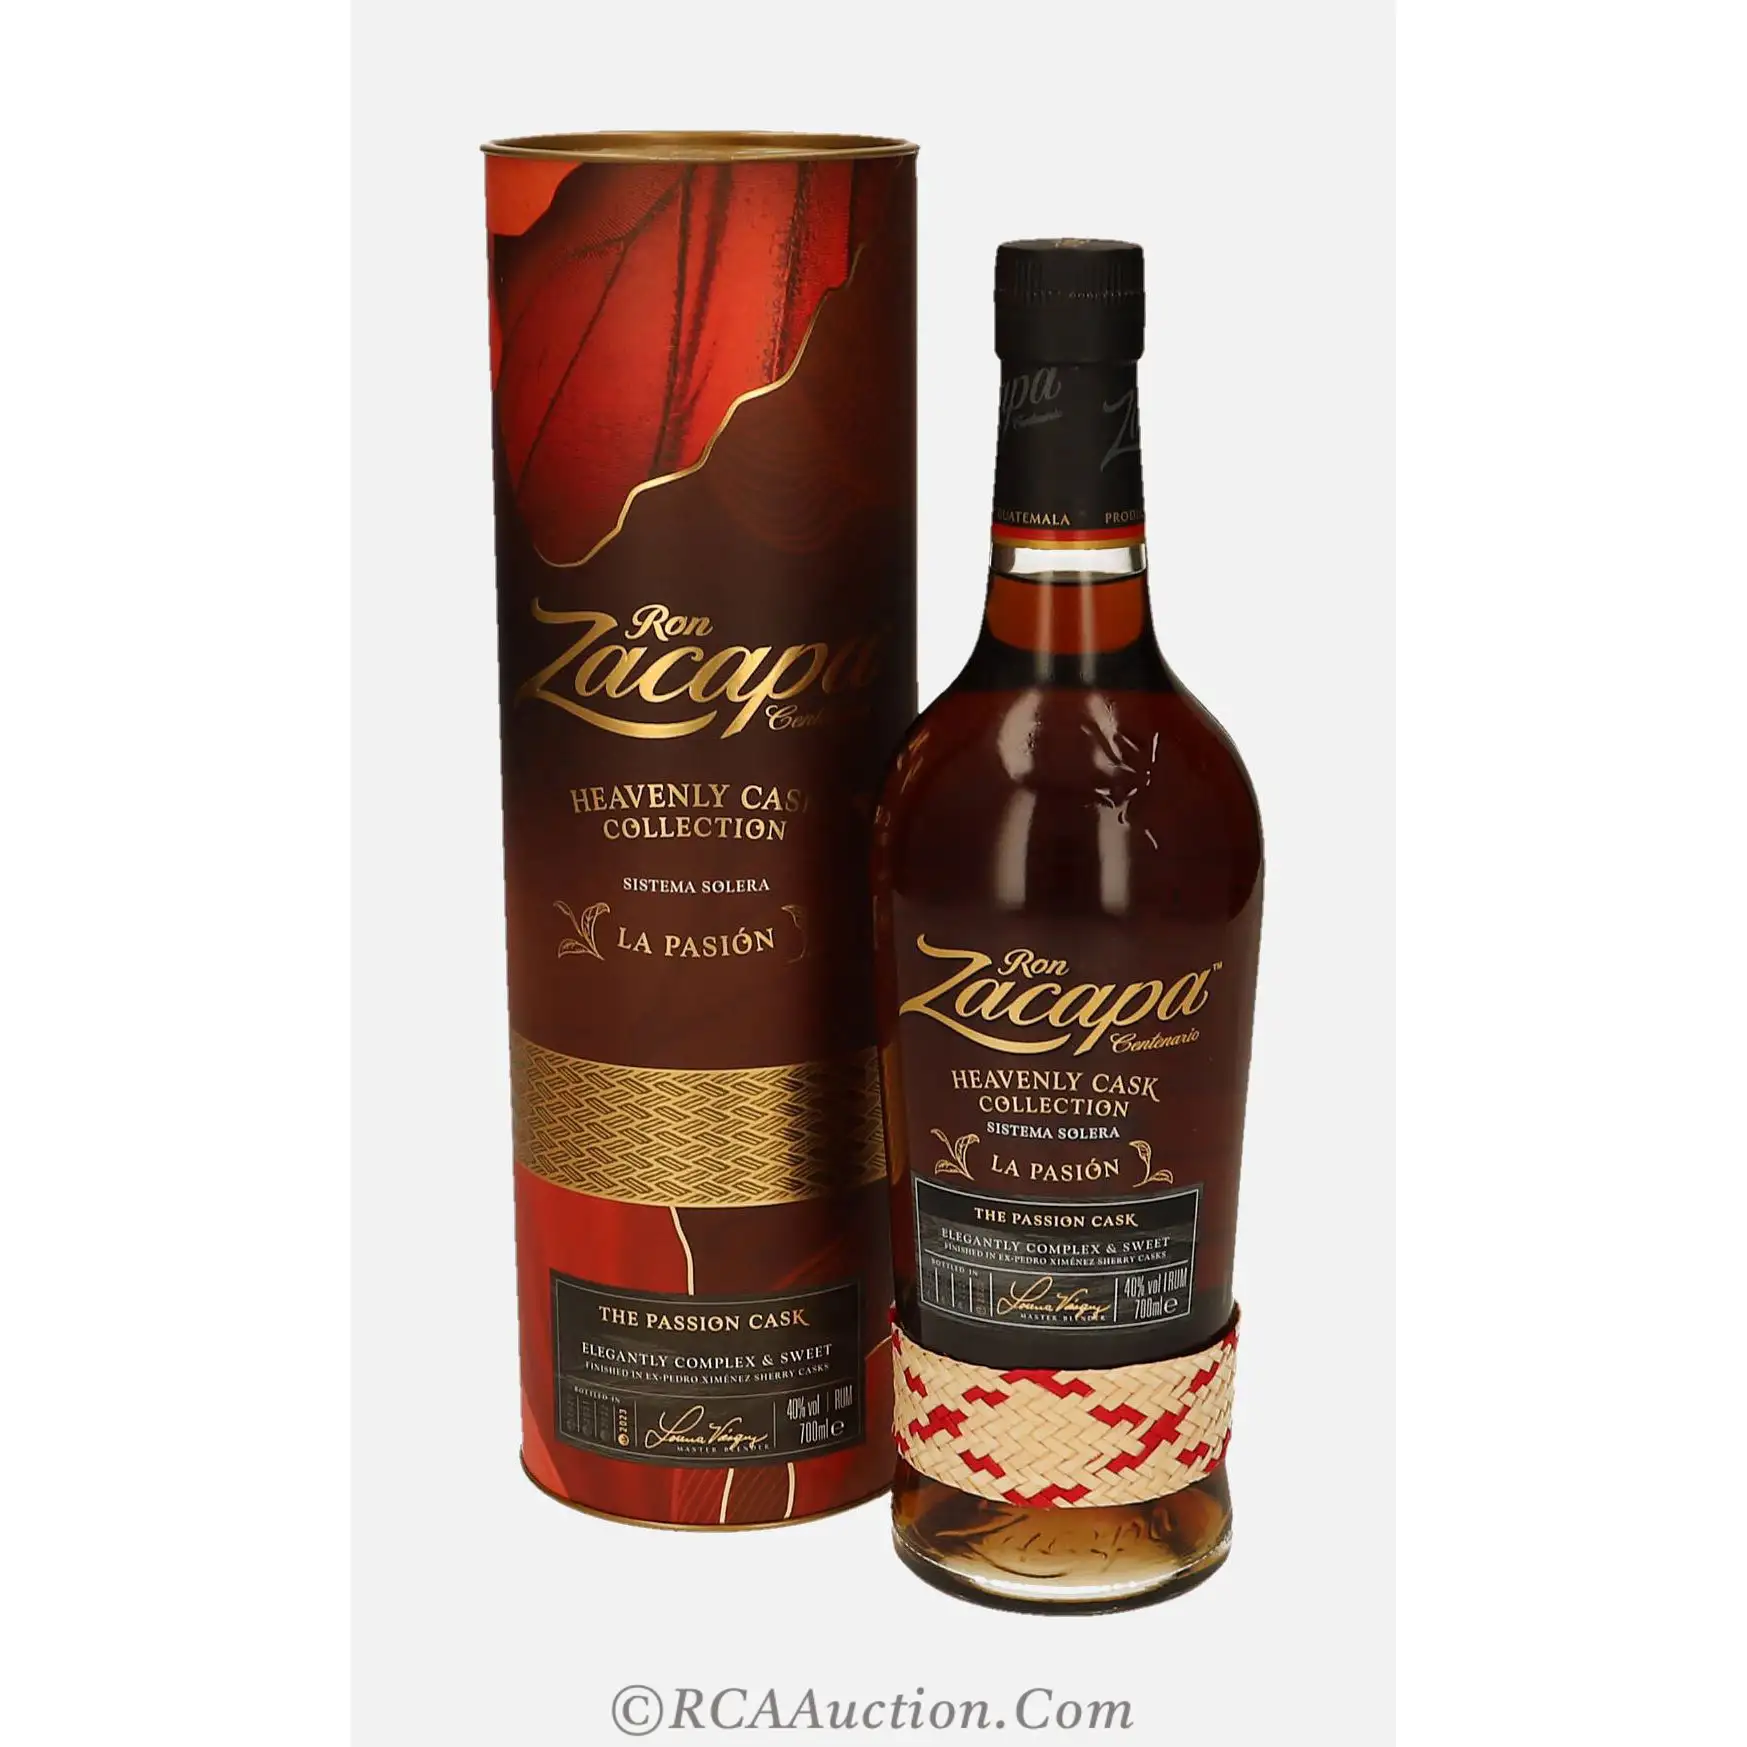 Image of the front of the bottle of the rum Ron Zacapa LA PASION (The Passion Cask)